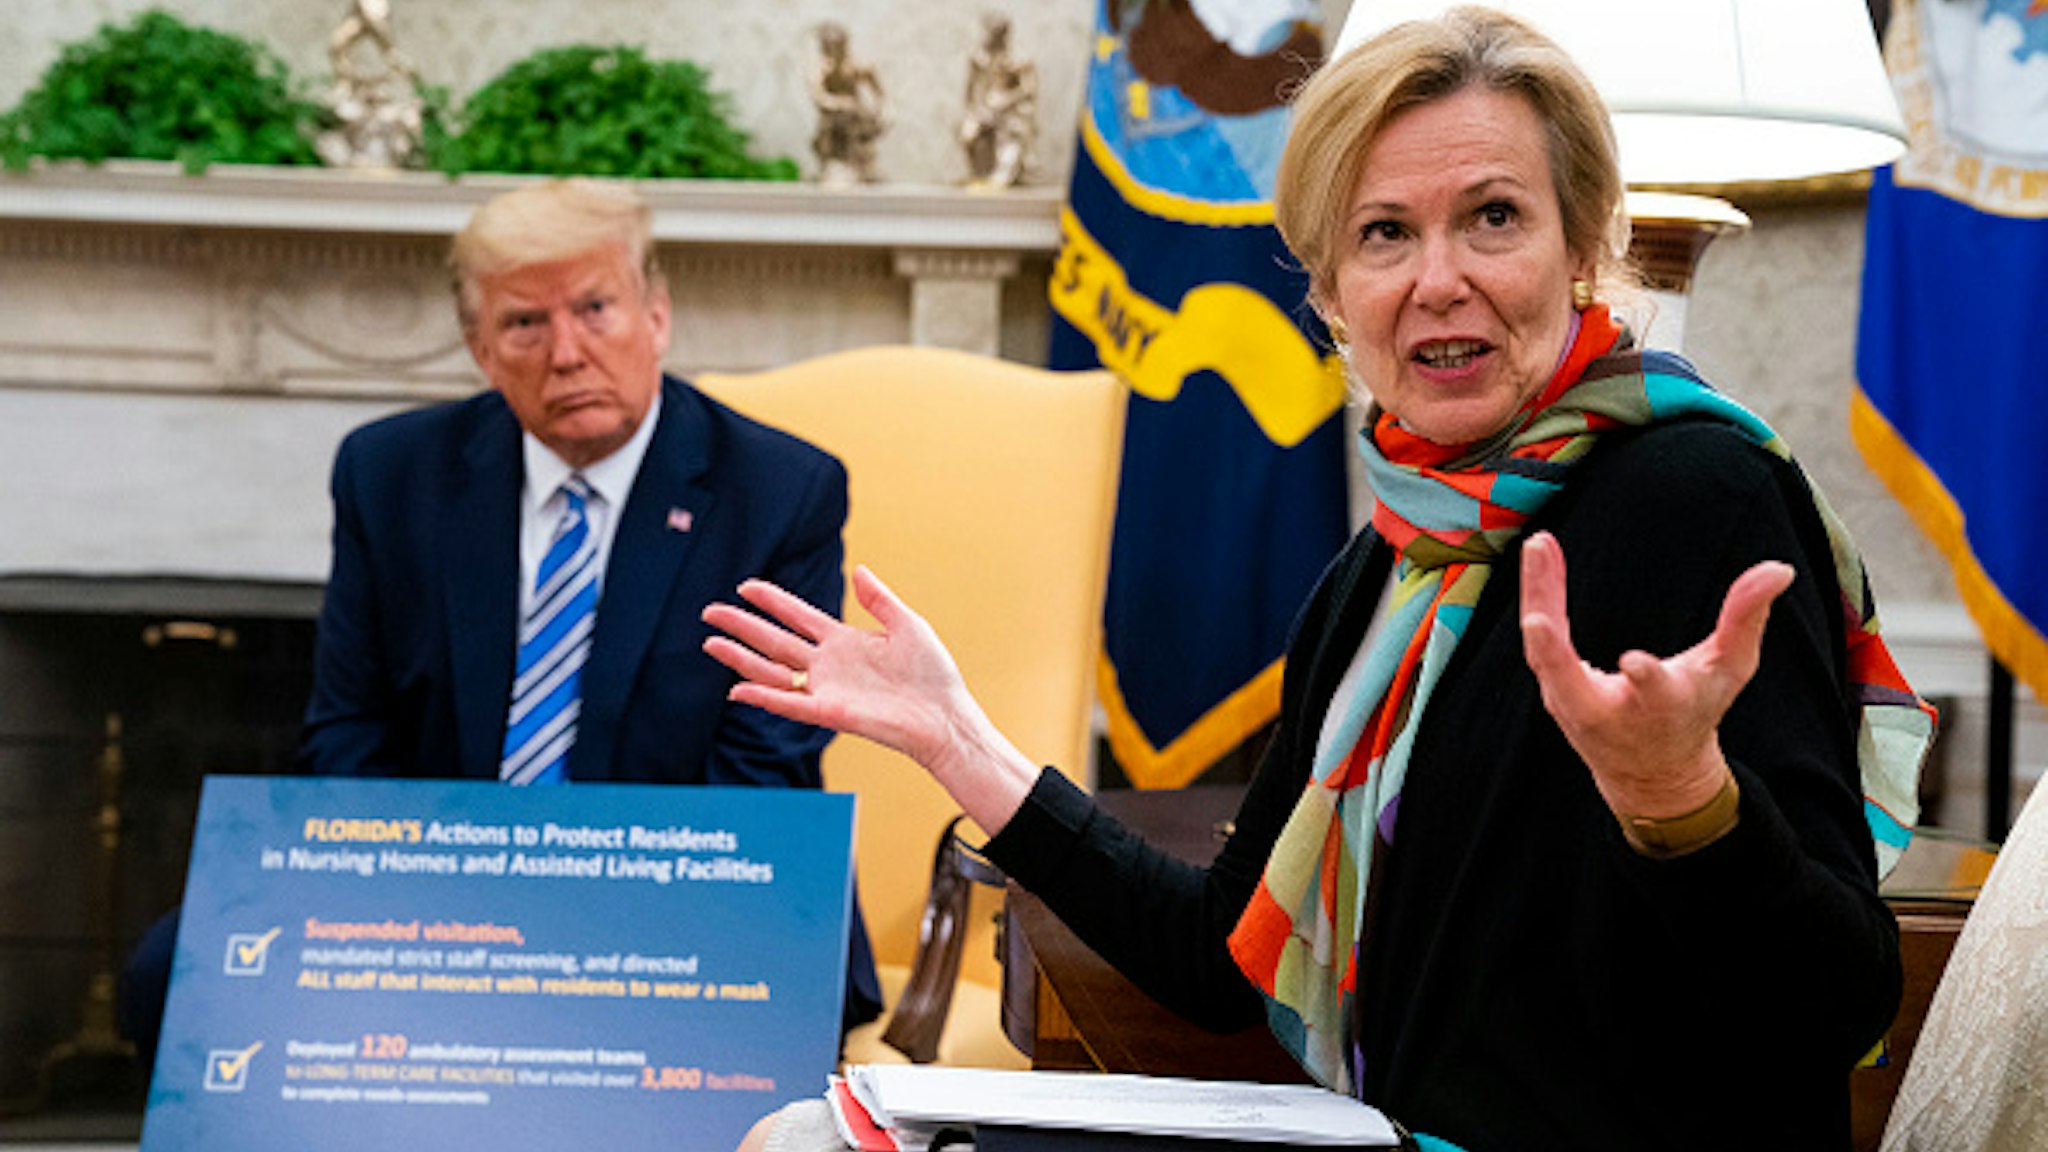 WASHINGTON, DC - APRIL 28: White House Coronavirus Task Force Coordinator Deborah Birx answers a question while meeting with Florida Gov. Ron DeSantis and U.S. President Donald Trump and in the Oval Office of the White House on April 28, 2020 in Washington, DC. Trump met with DeSantis to discuss ways that Florida is planning to gradually re-open the state in the wake of the COVID-19 pandemic.